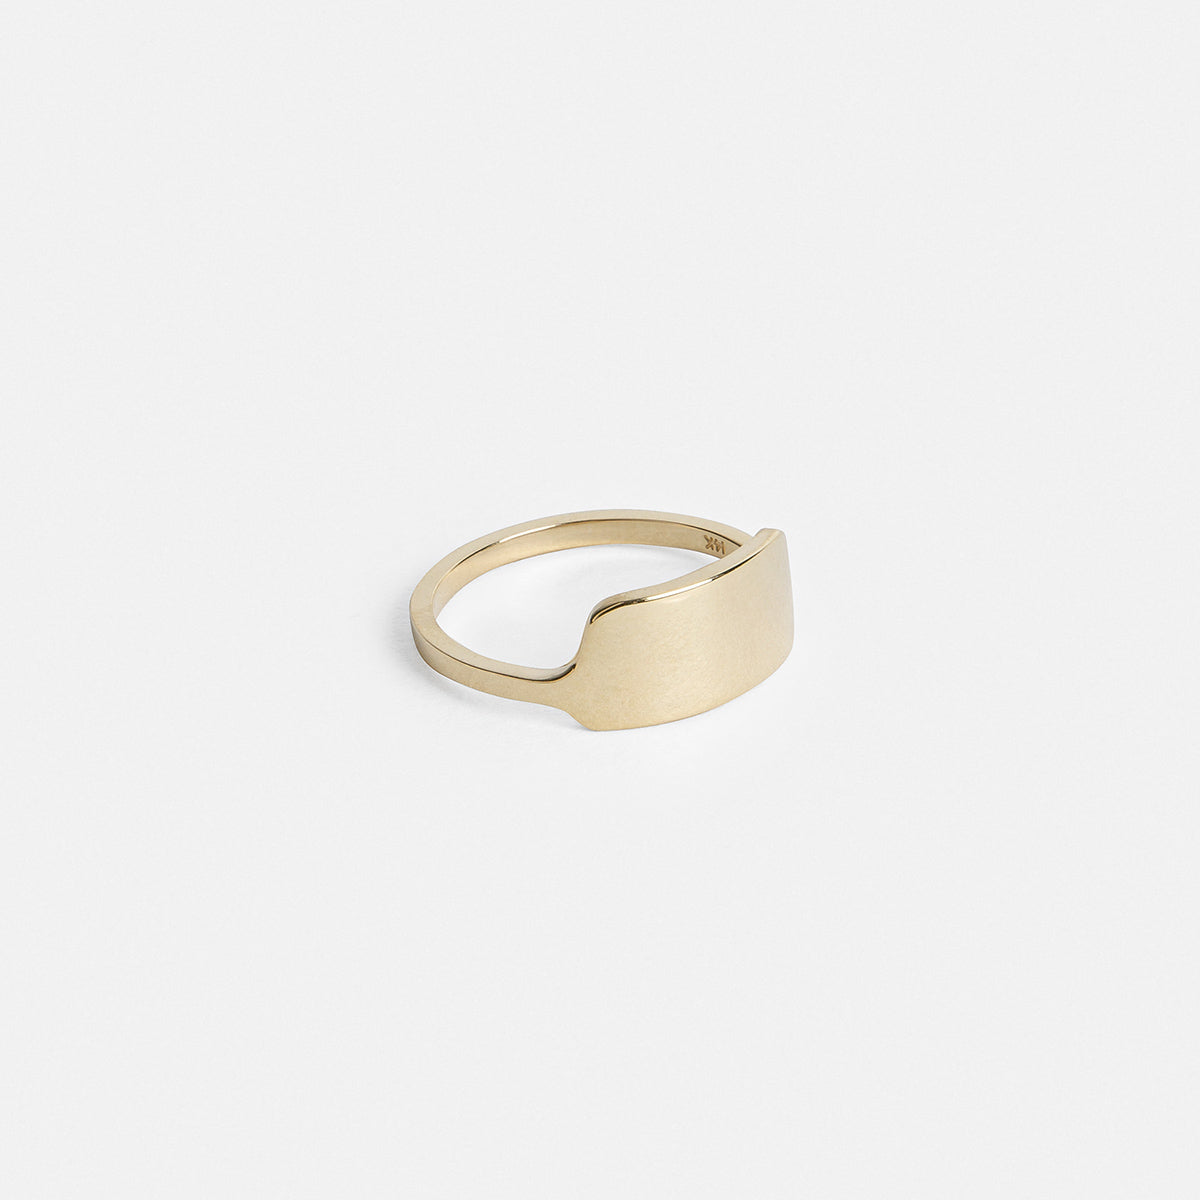 Tylu Unconventional Ring in 14k Gold By SHW Fine Jewelry NYC